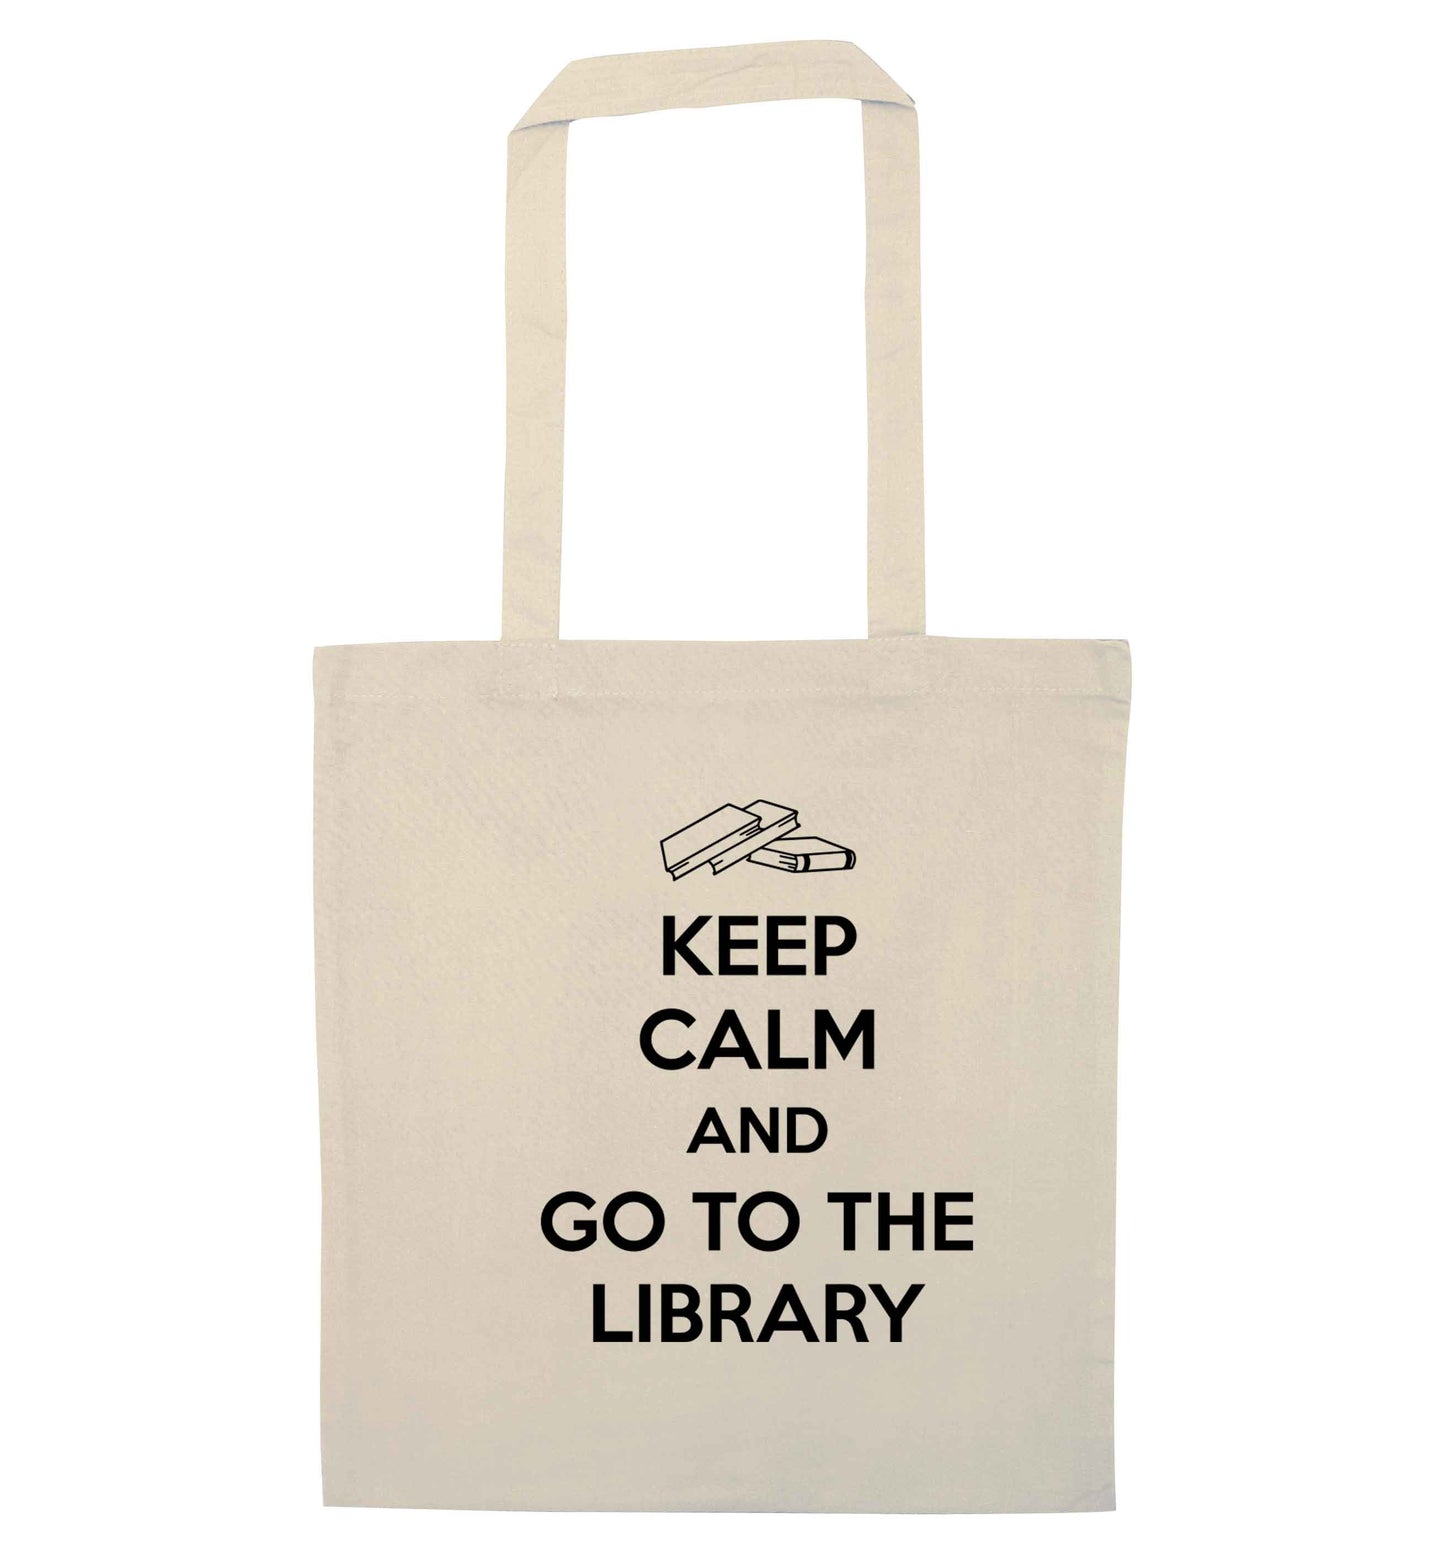 Keep calm and go to the library natural tote bag